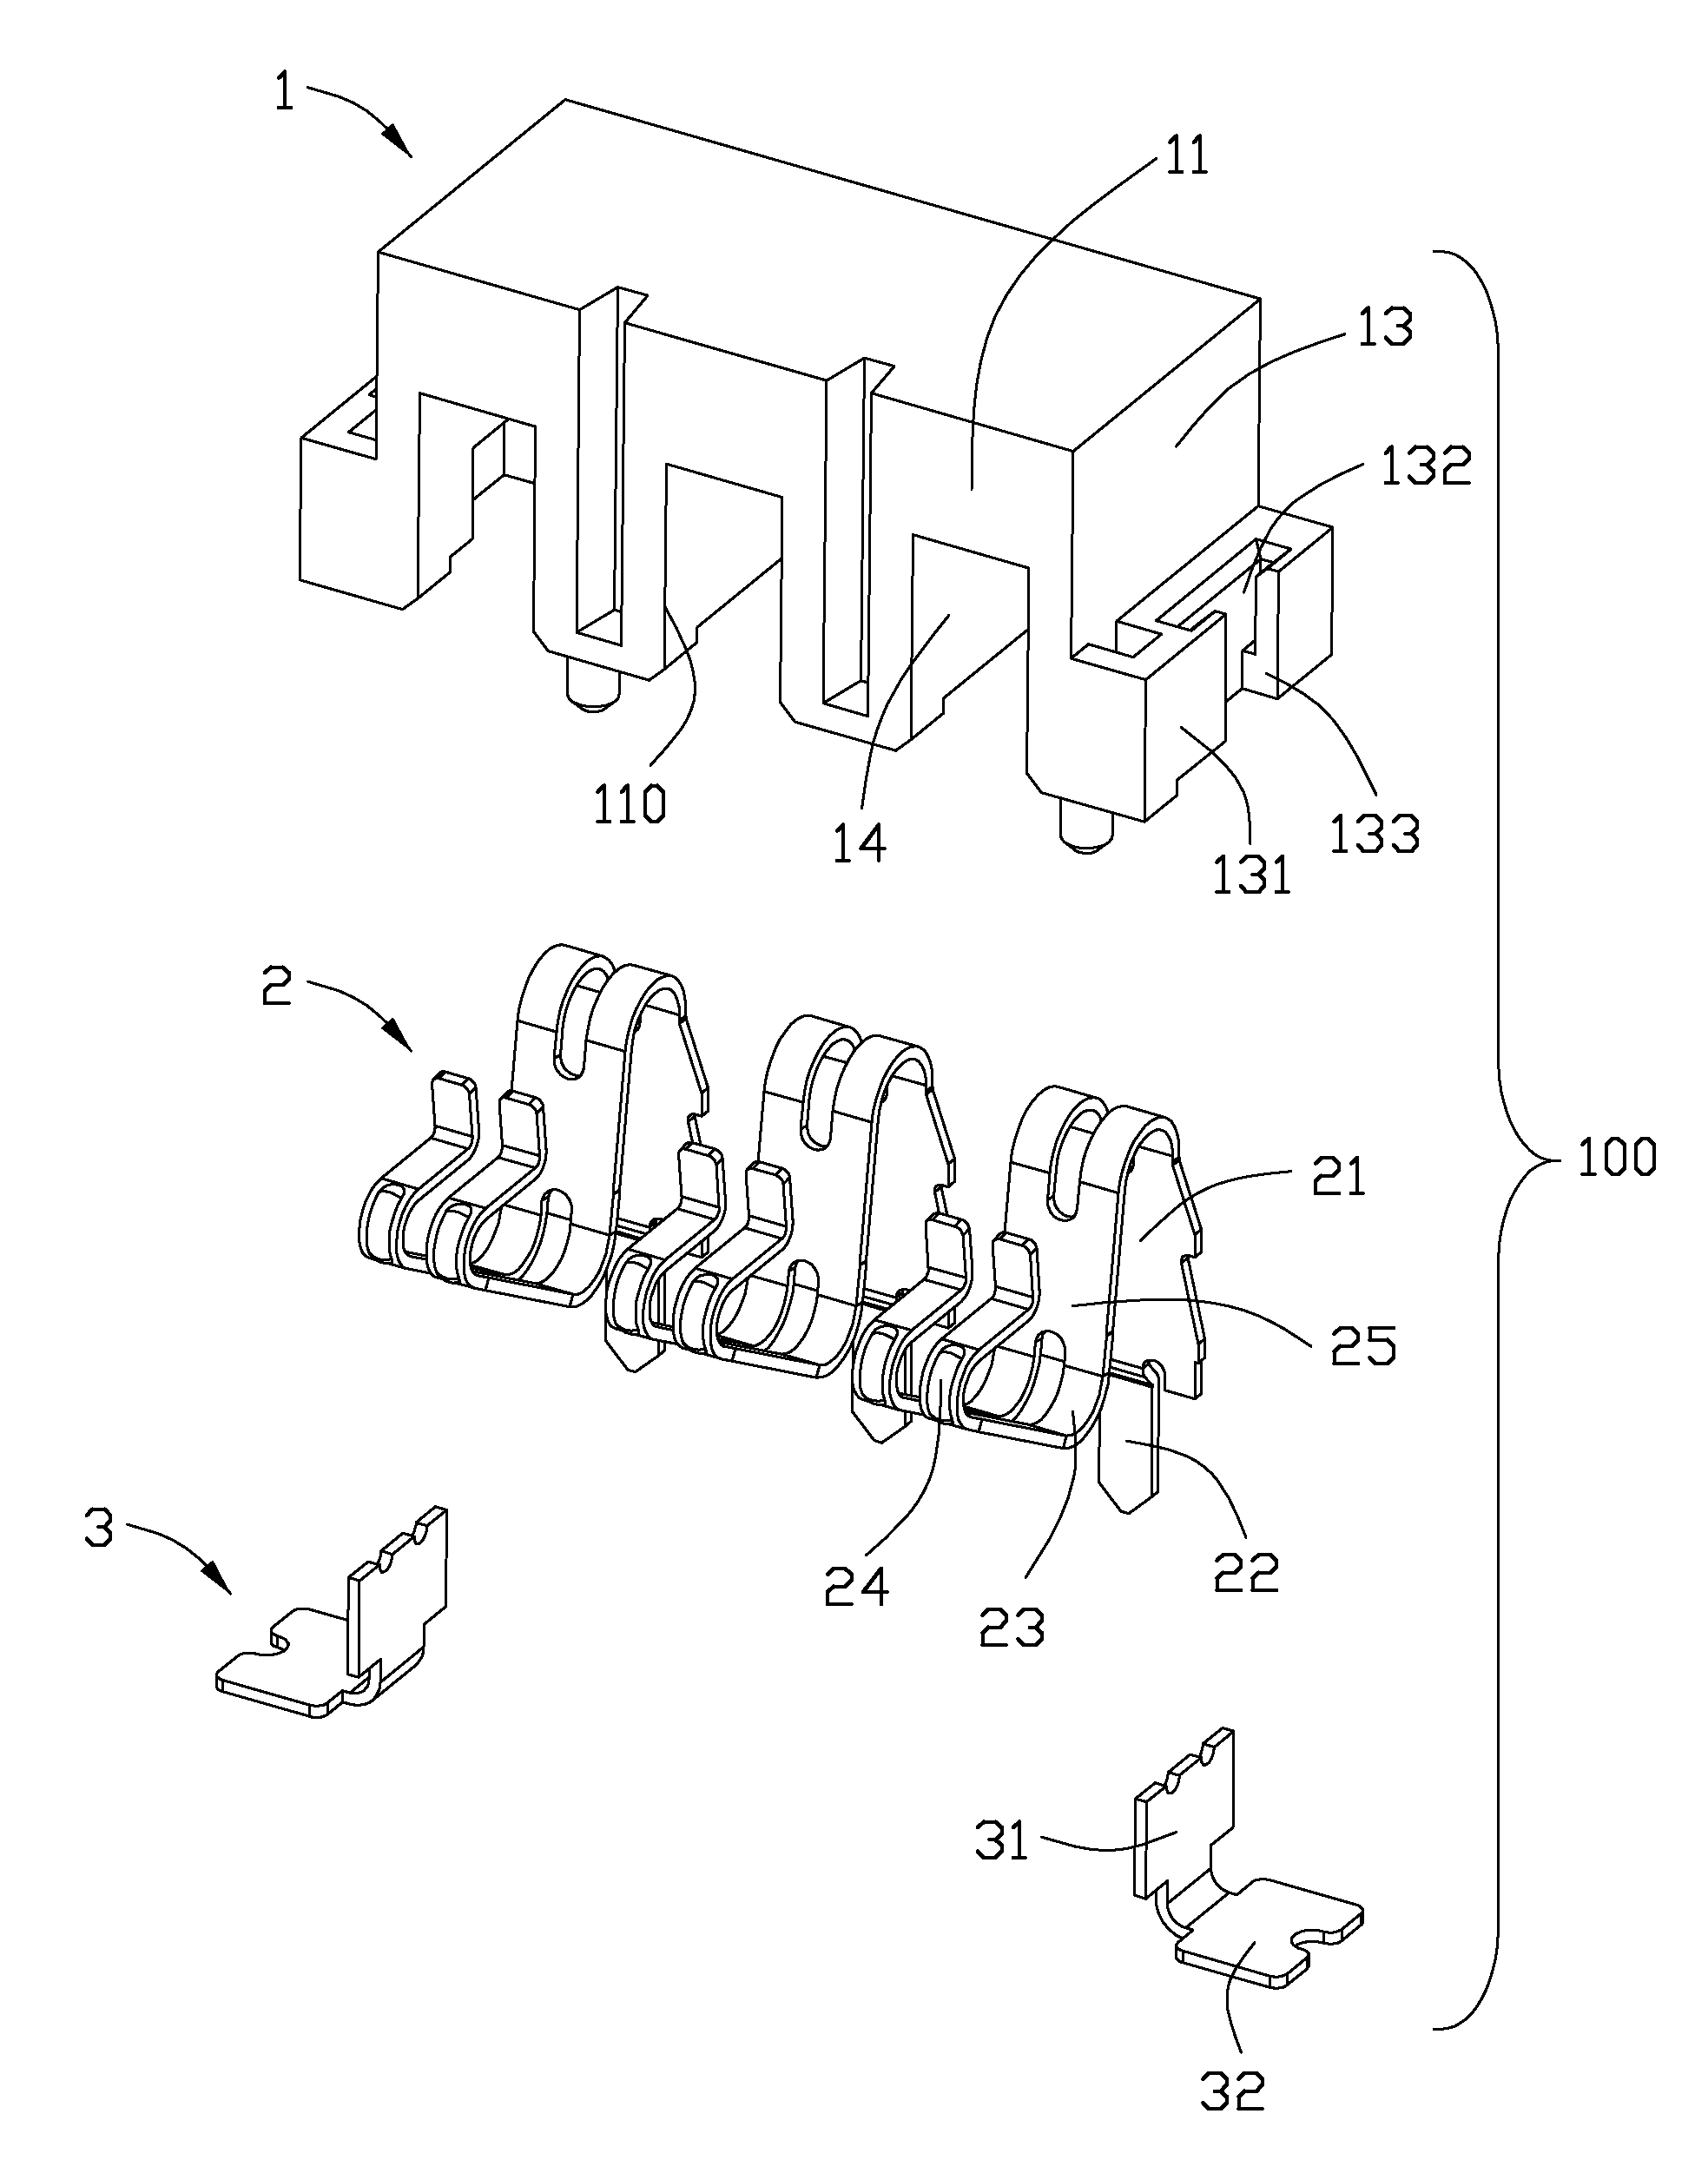 Electrical connector with high intensity contacts